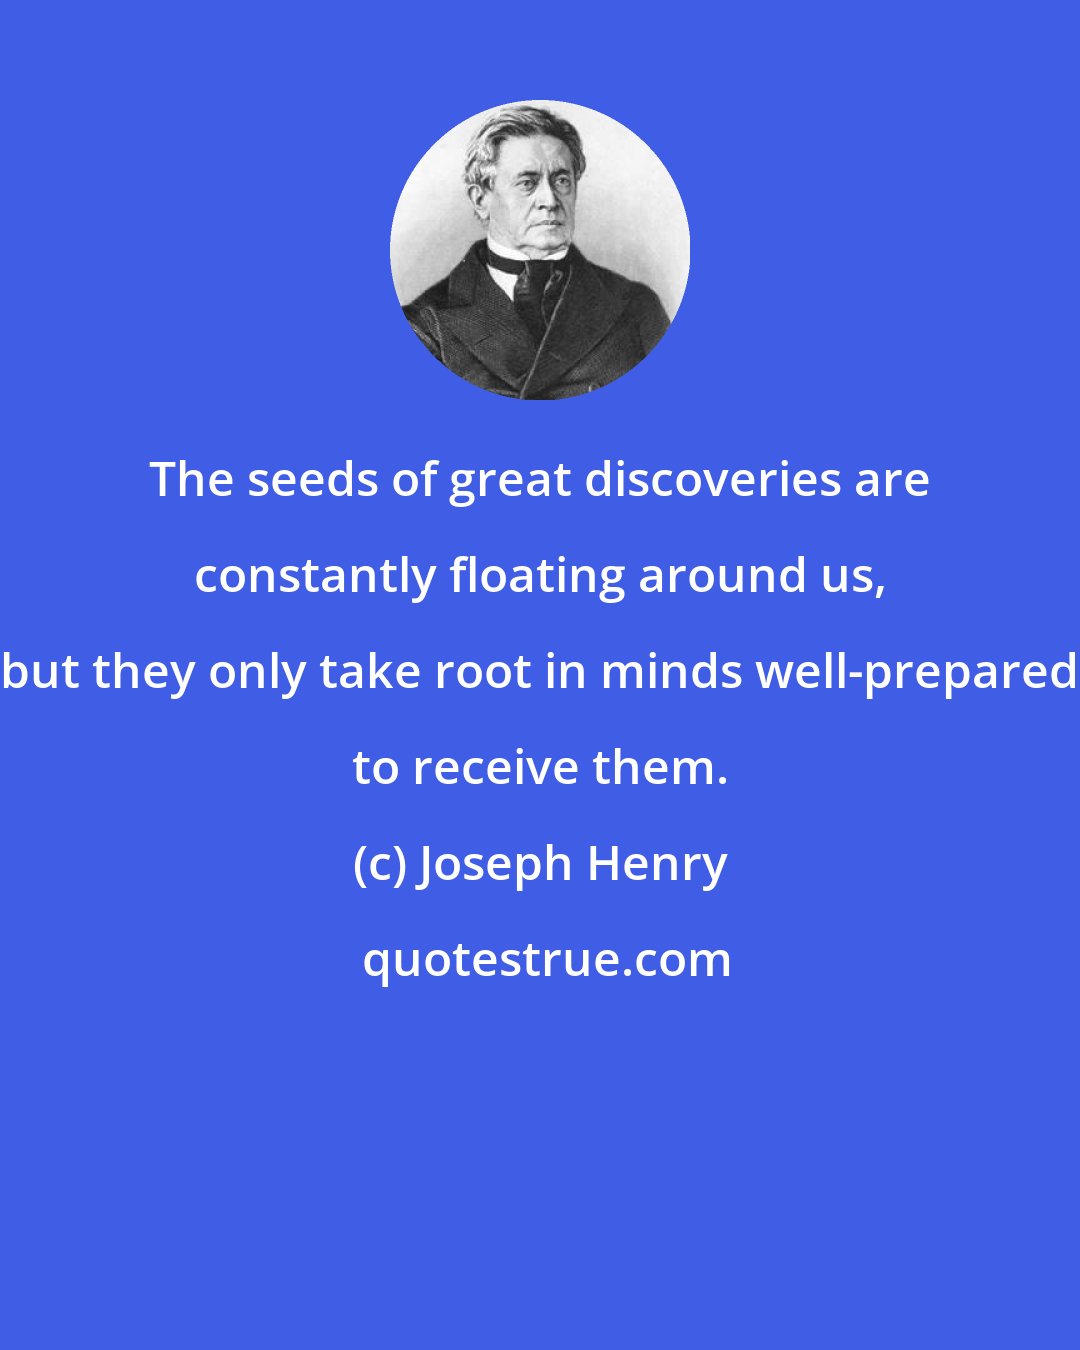 Joseph Henry: The seeds of great discoveries are constantly floating around us, but they only take root in minds well-prepared to receive them.